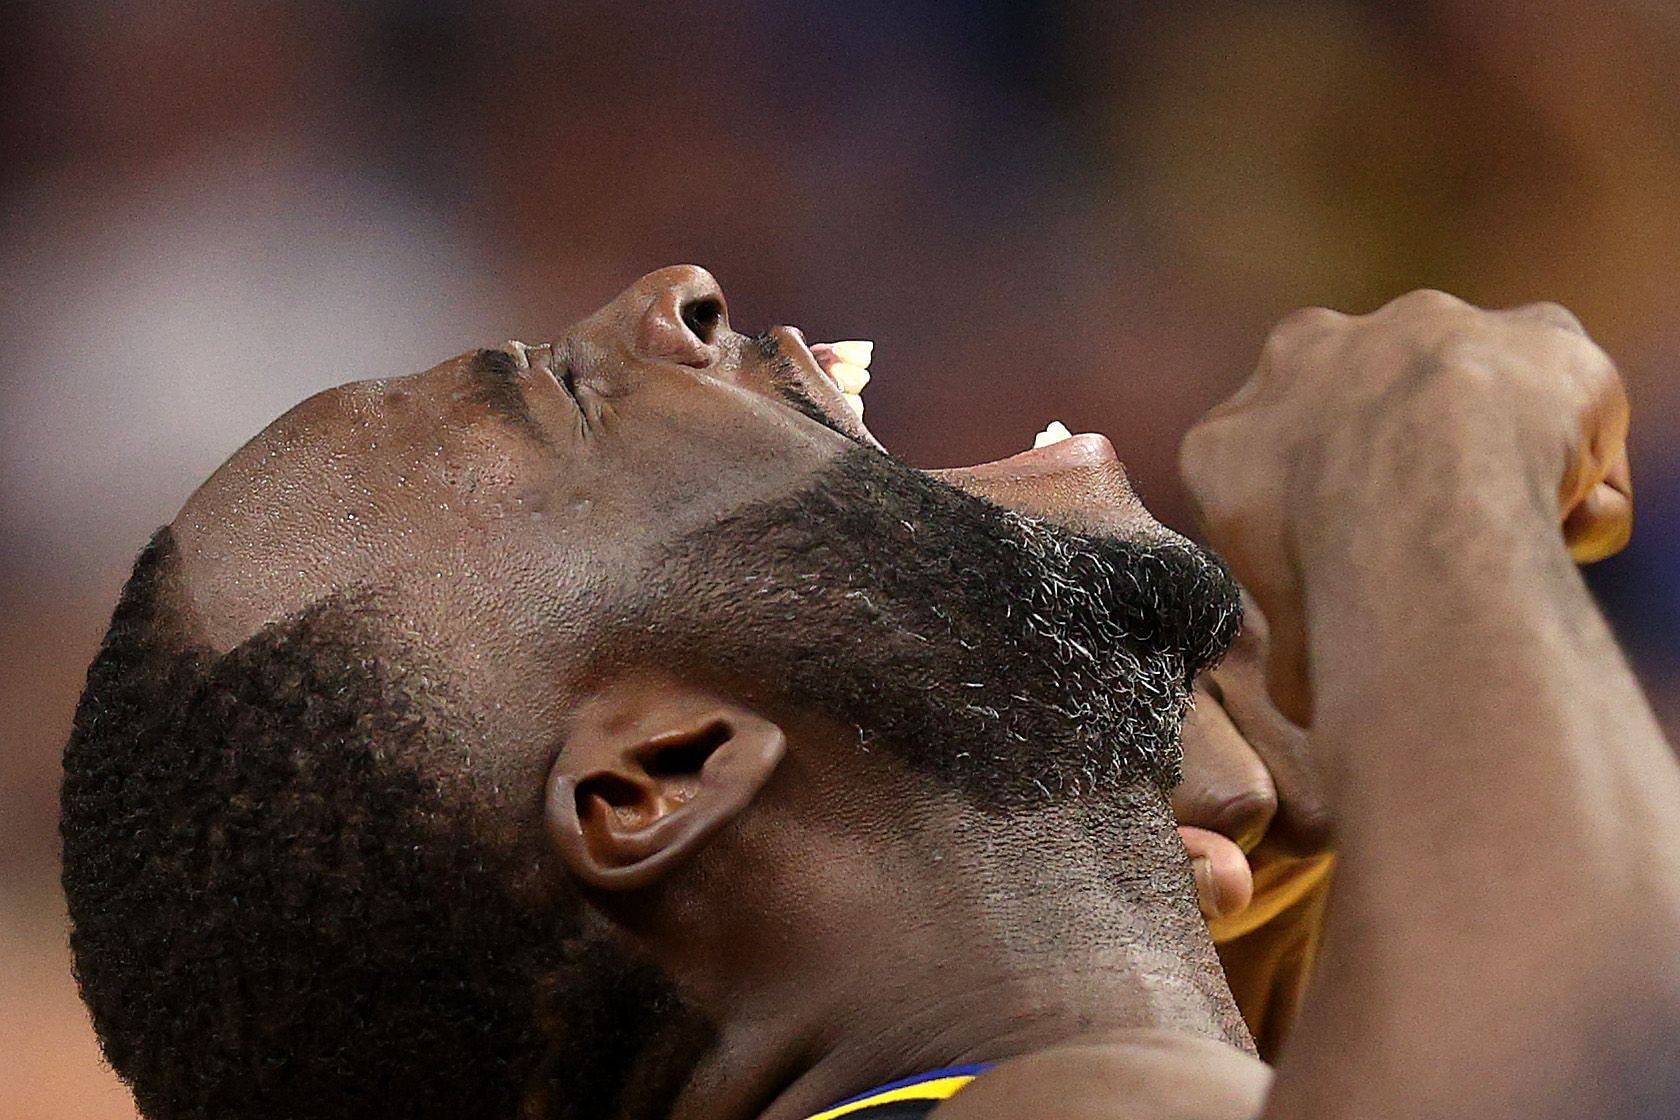 Draymond Green had an all-round game for the Golden State Warriors in their 123-107 win over Denver